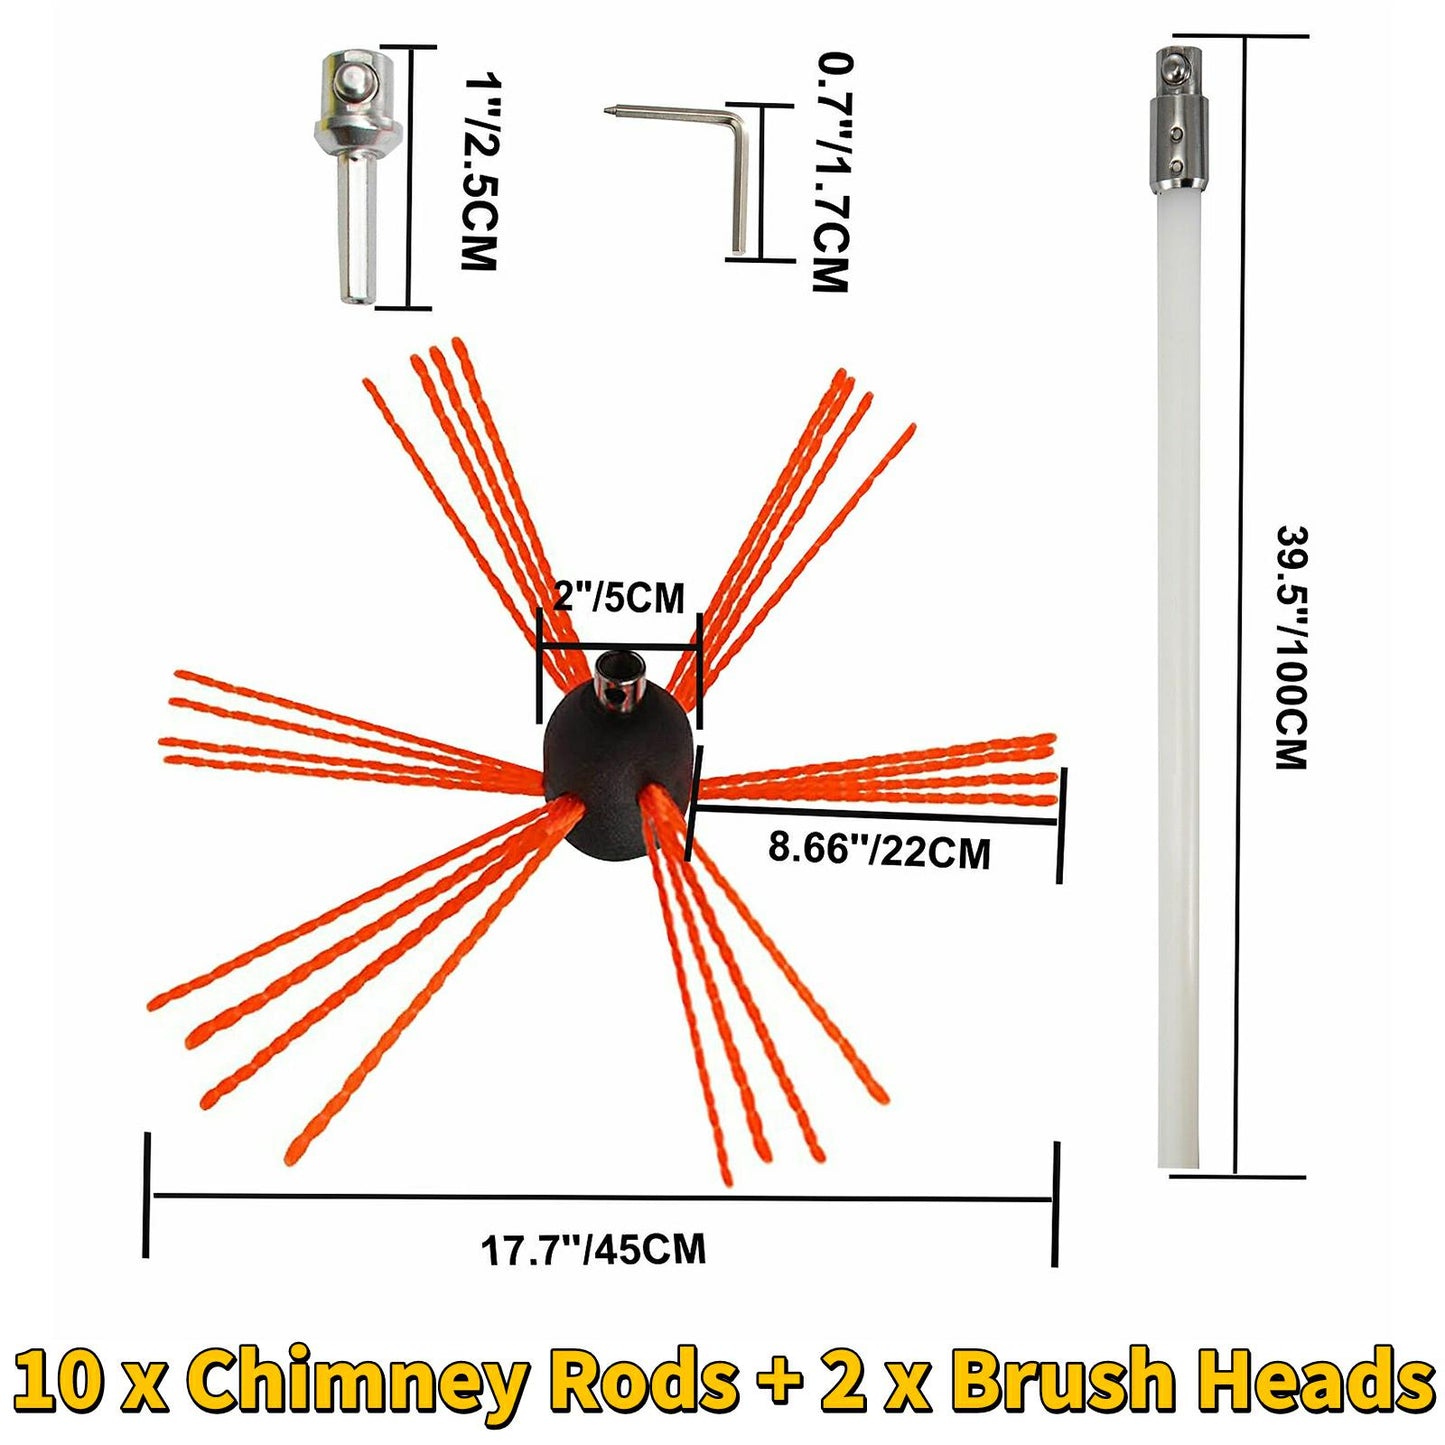 Chimney Sweep Kit, Nylon, Electrical Drill Drive, Flexible Rod Rotary Brush Head, Clean Flue Soot